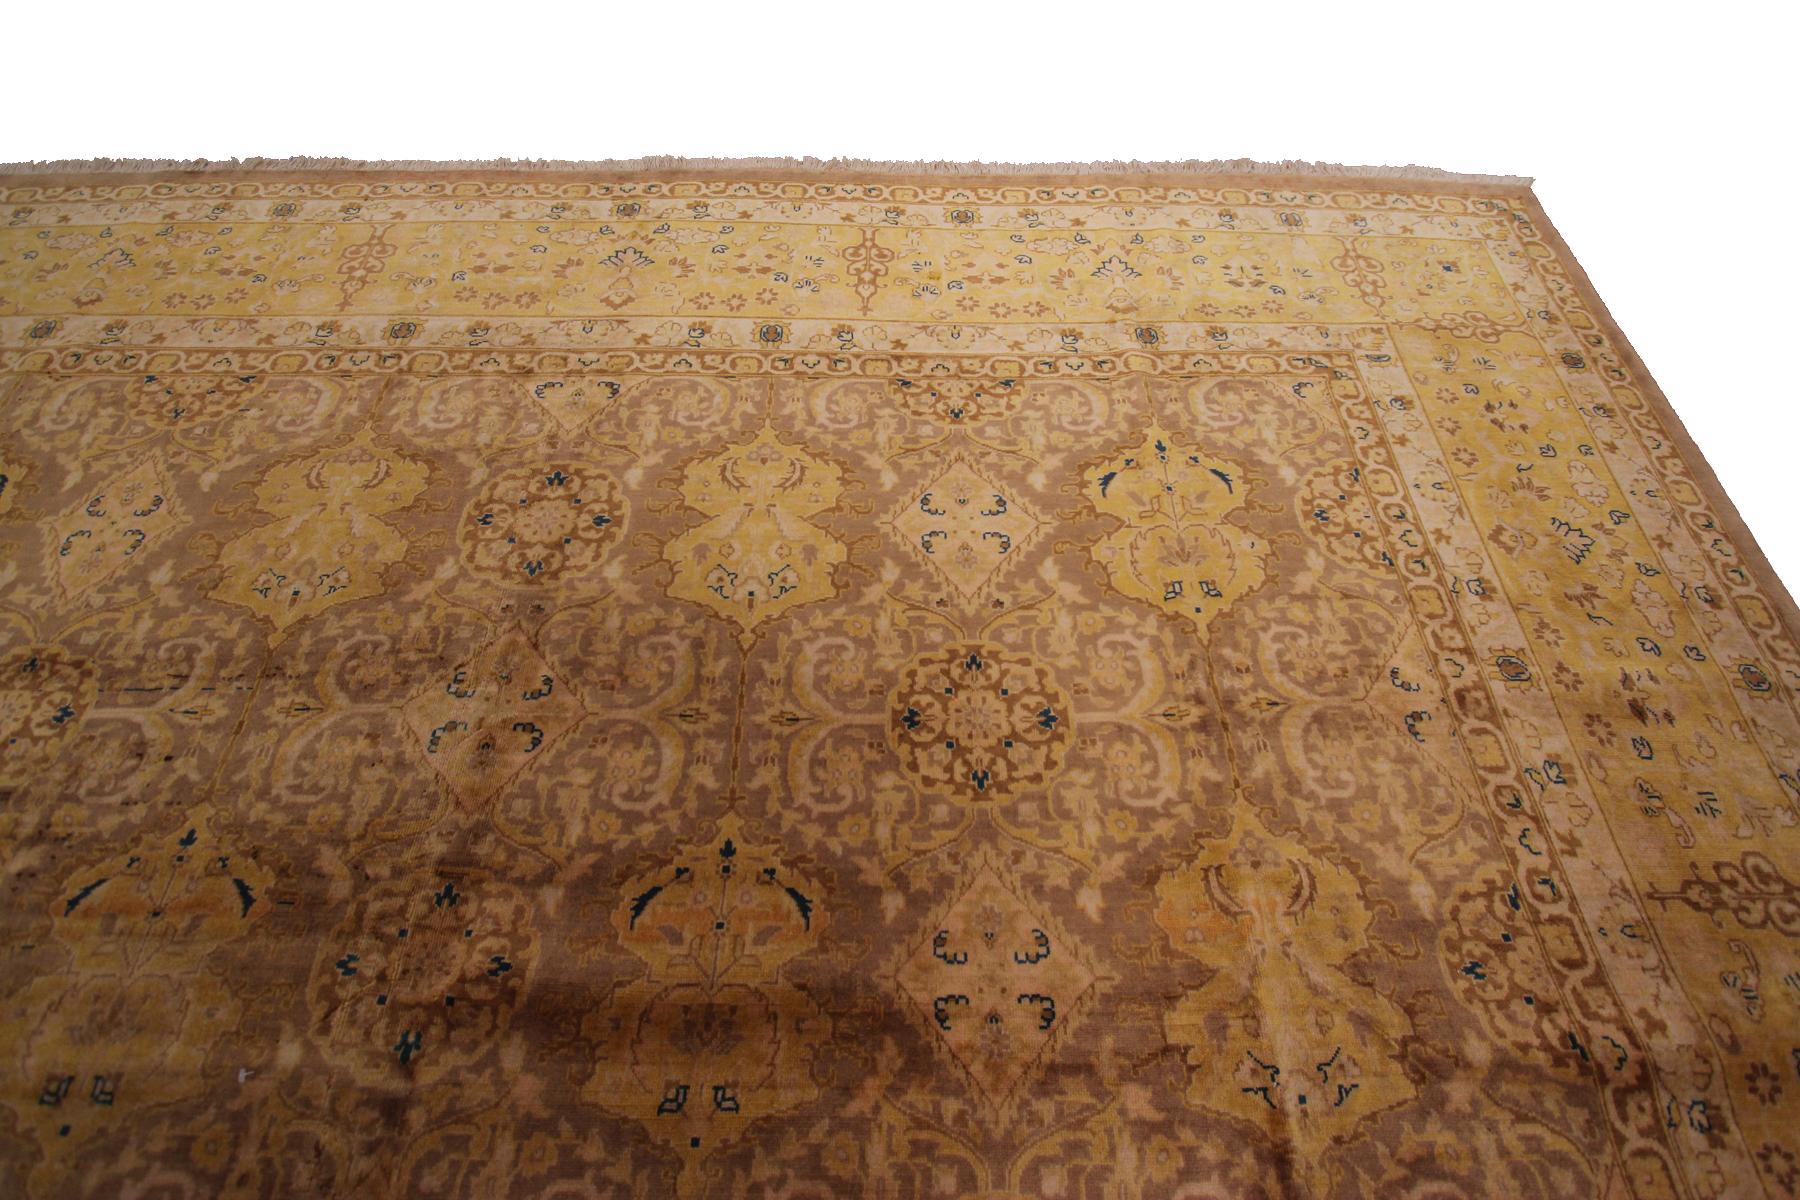 Vintage Tabriz Rug Geometric Overall Design Gold 9x12 Handmade Persian Rug In Good Condition For Sale In New York, NY